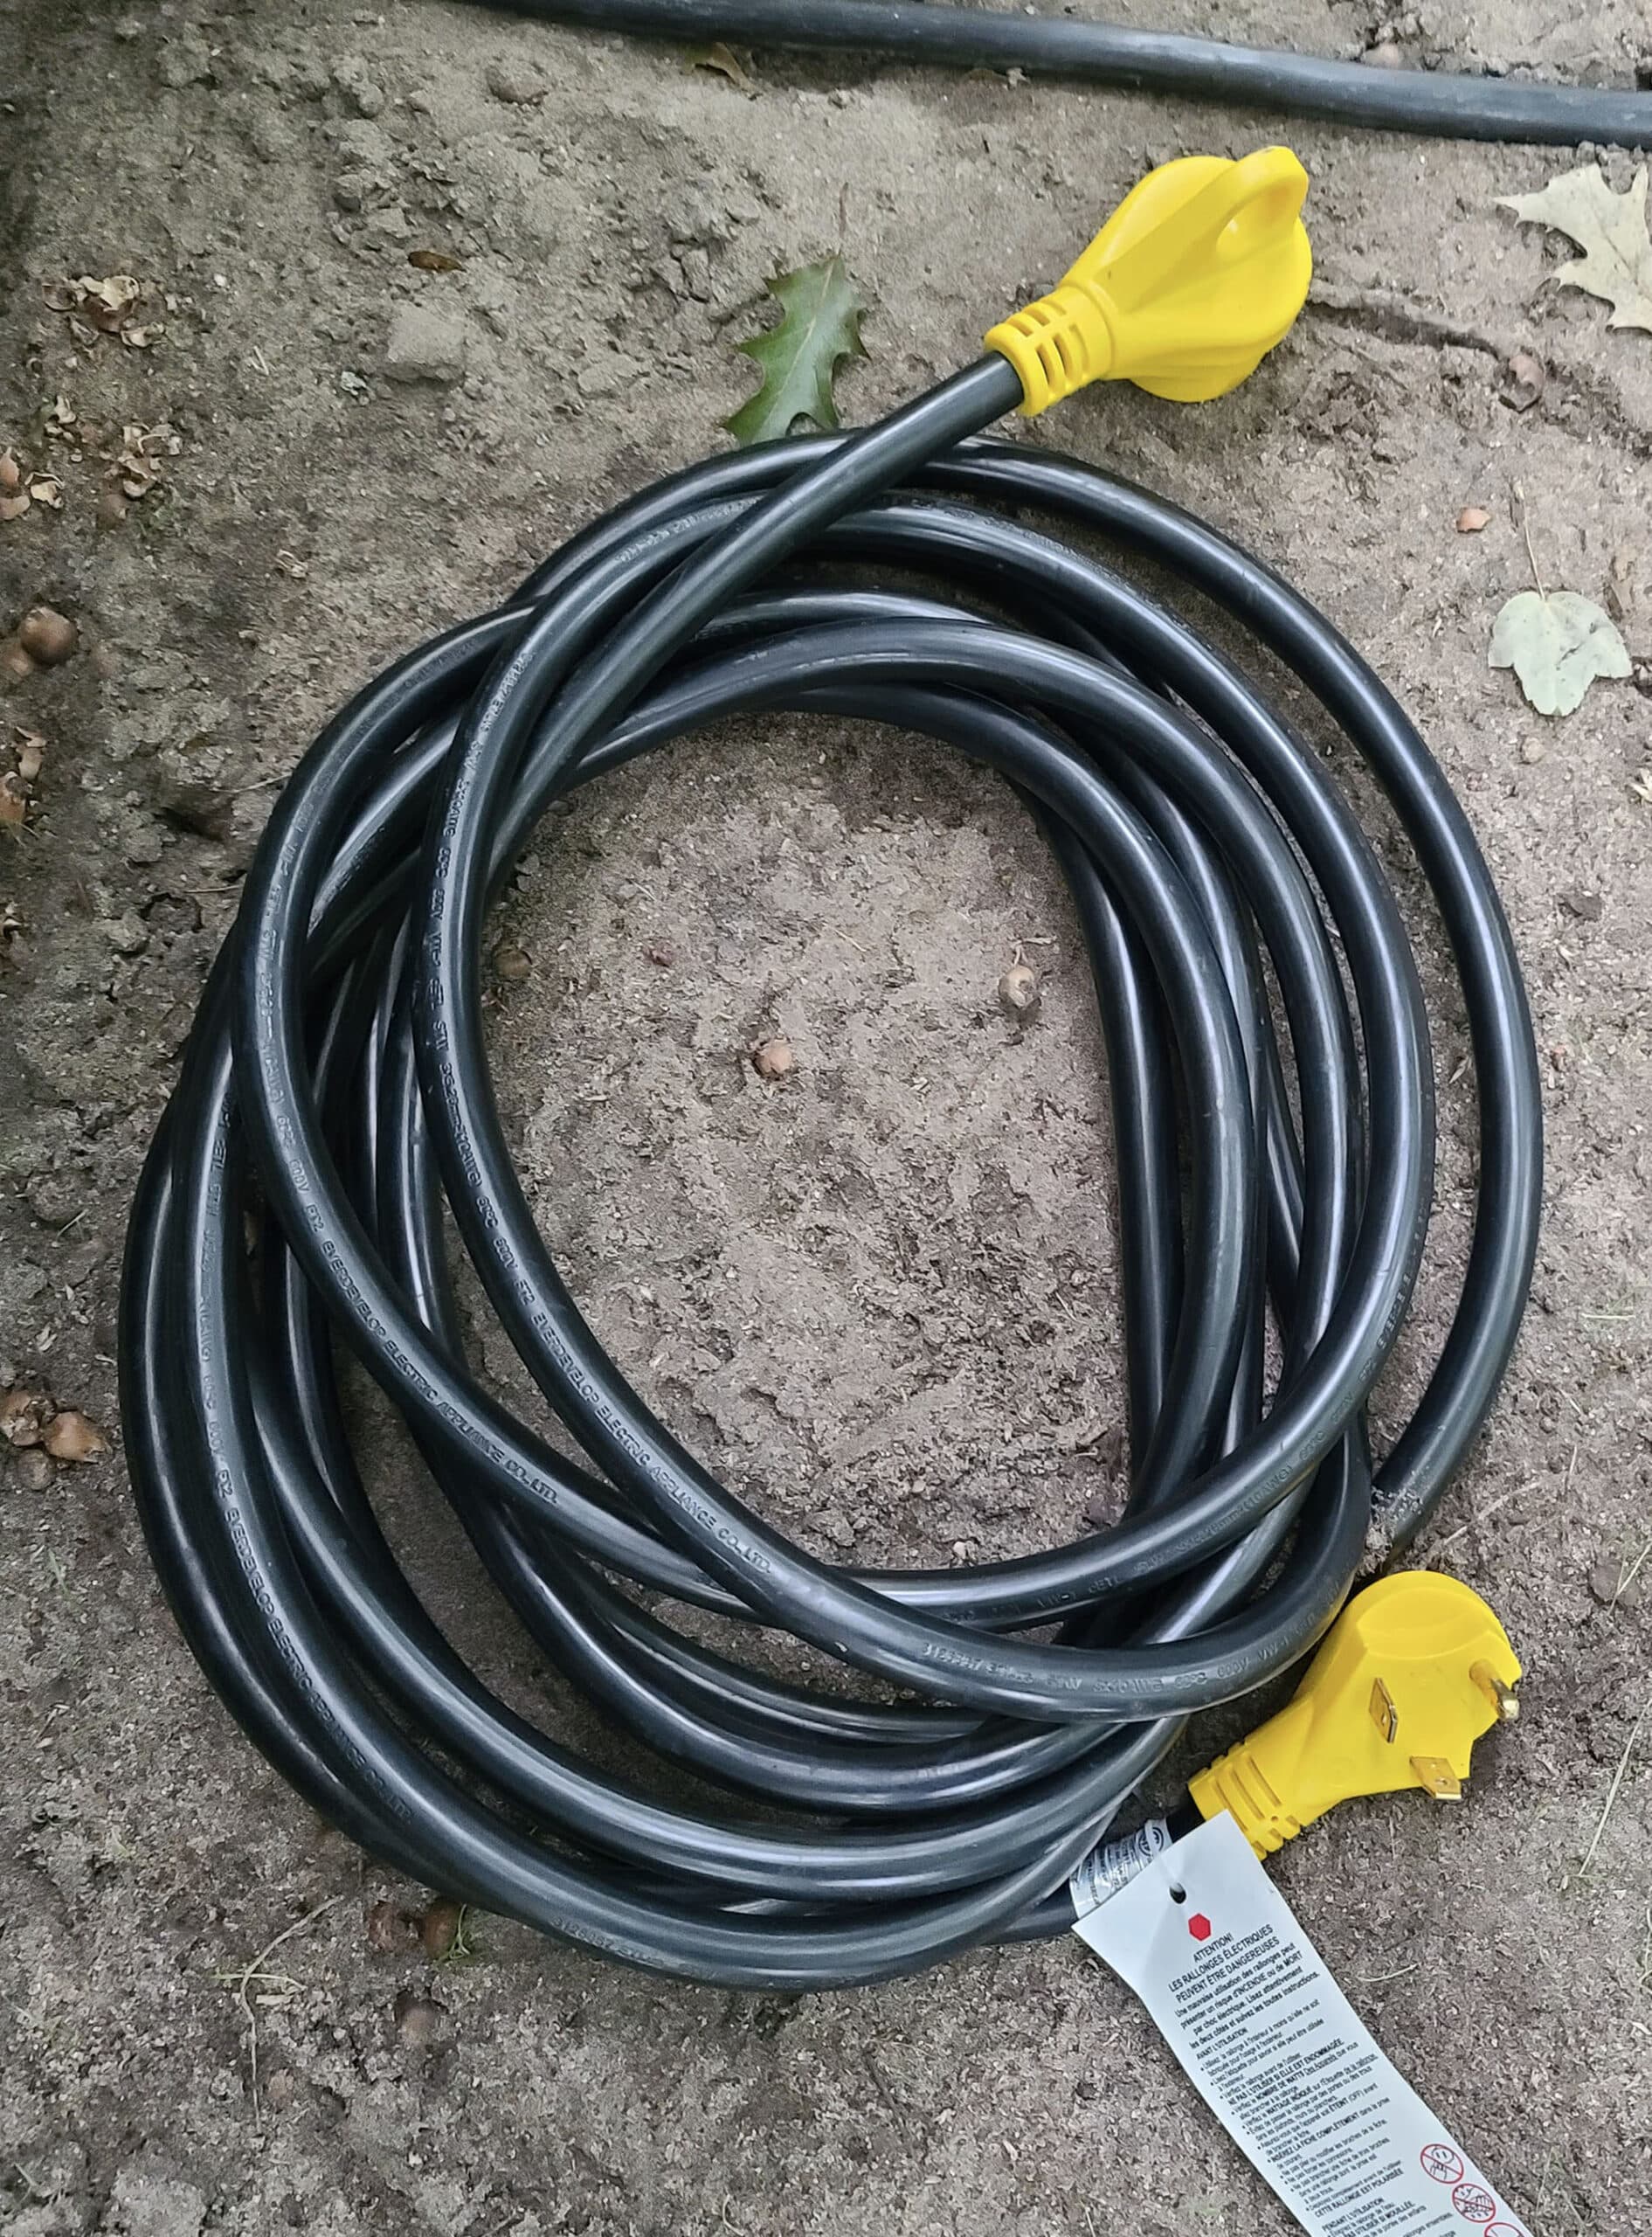 A black RV electrical cord is coiled on the ground.